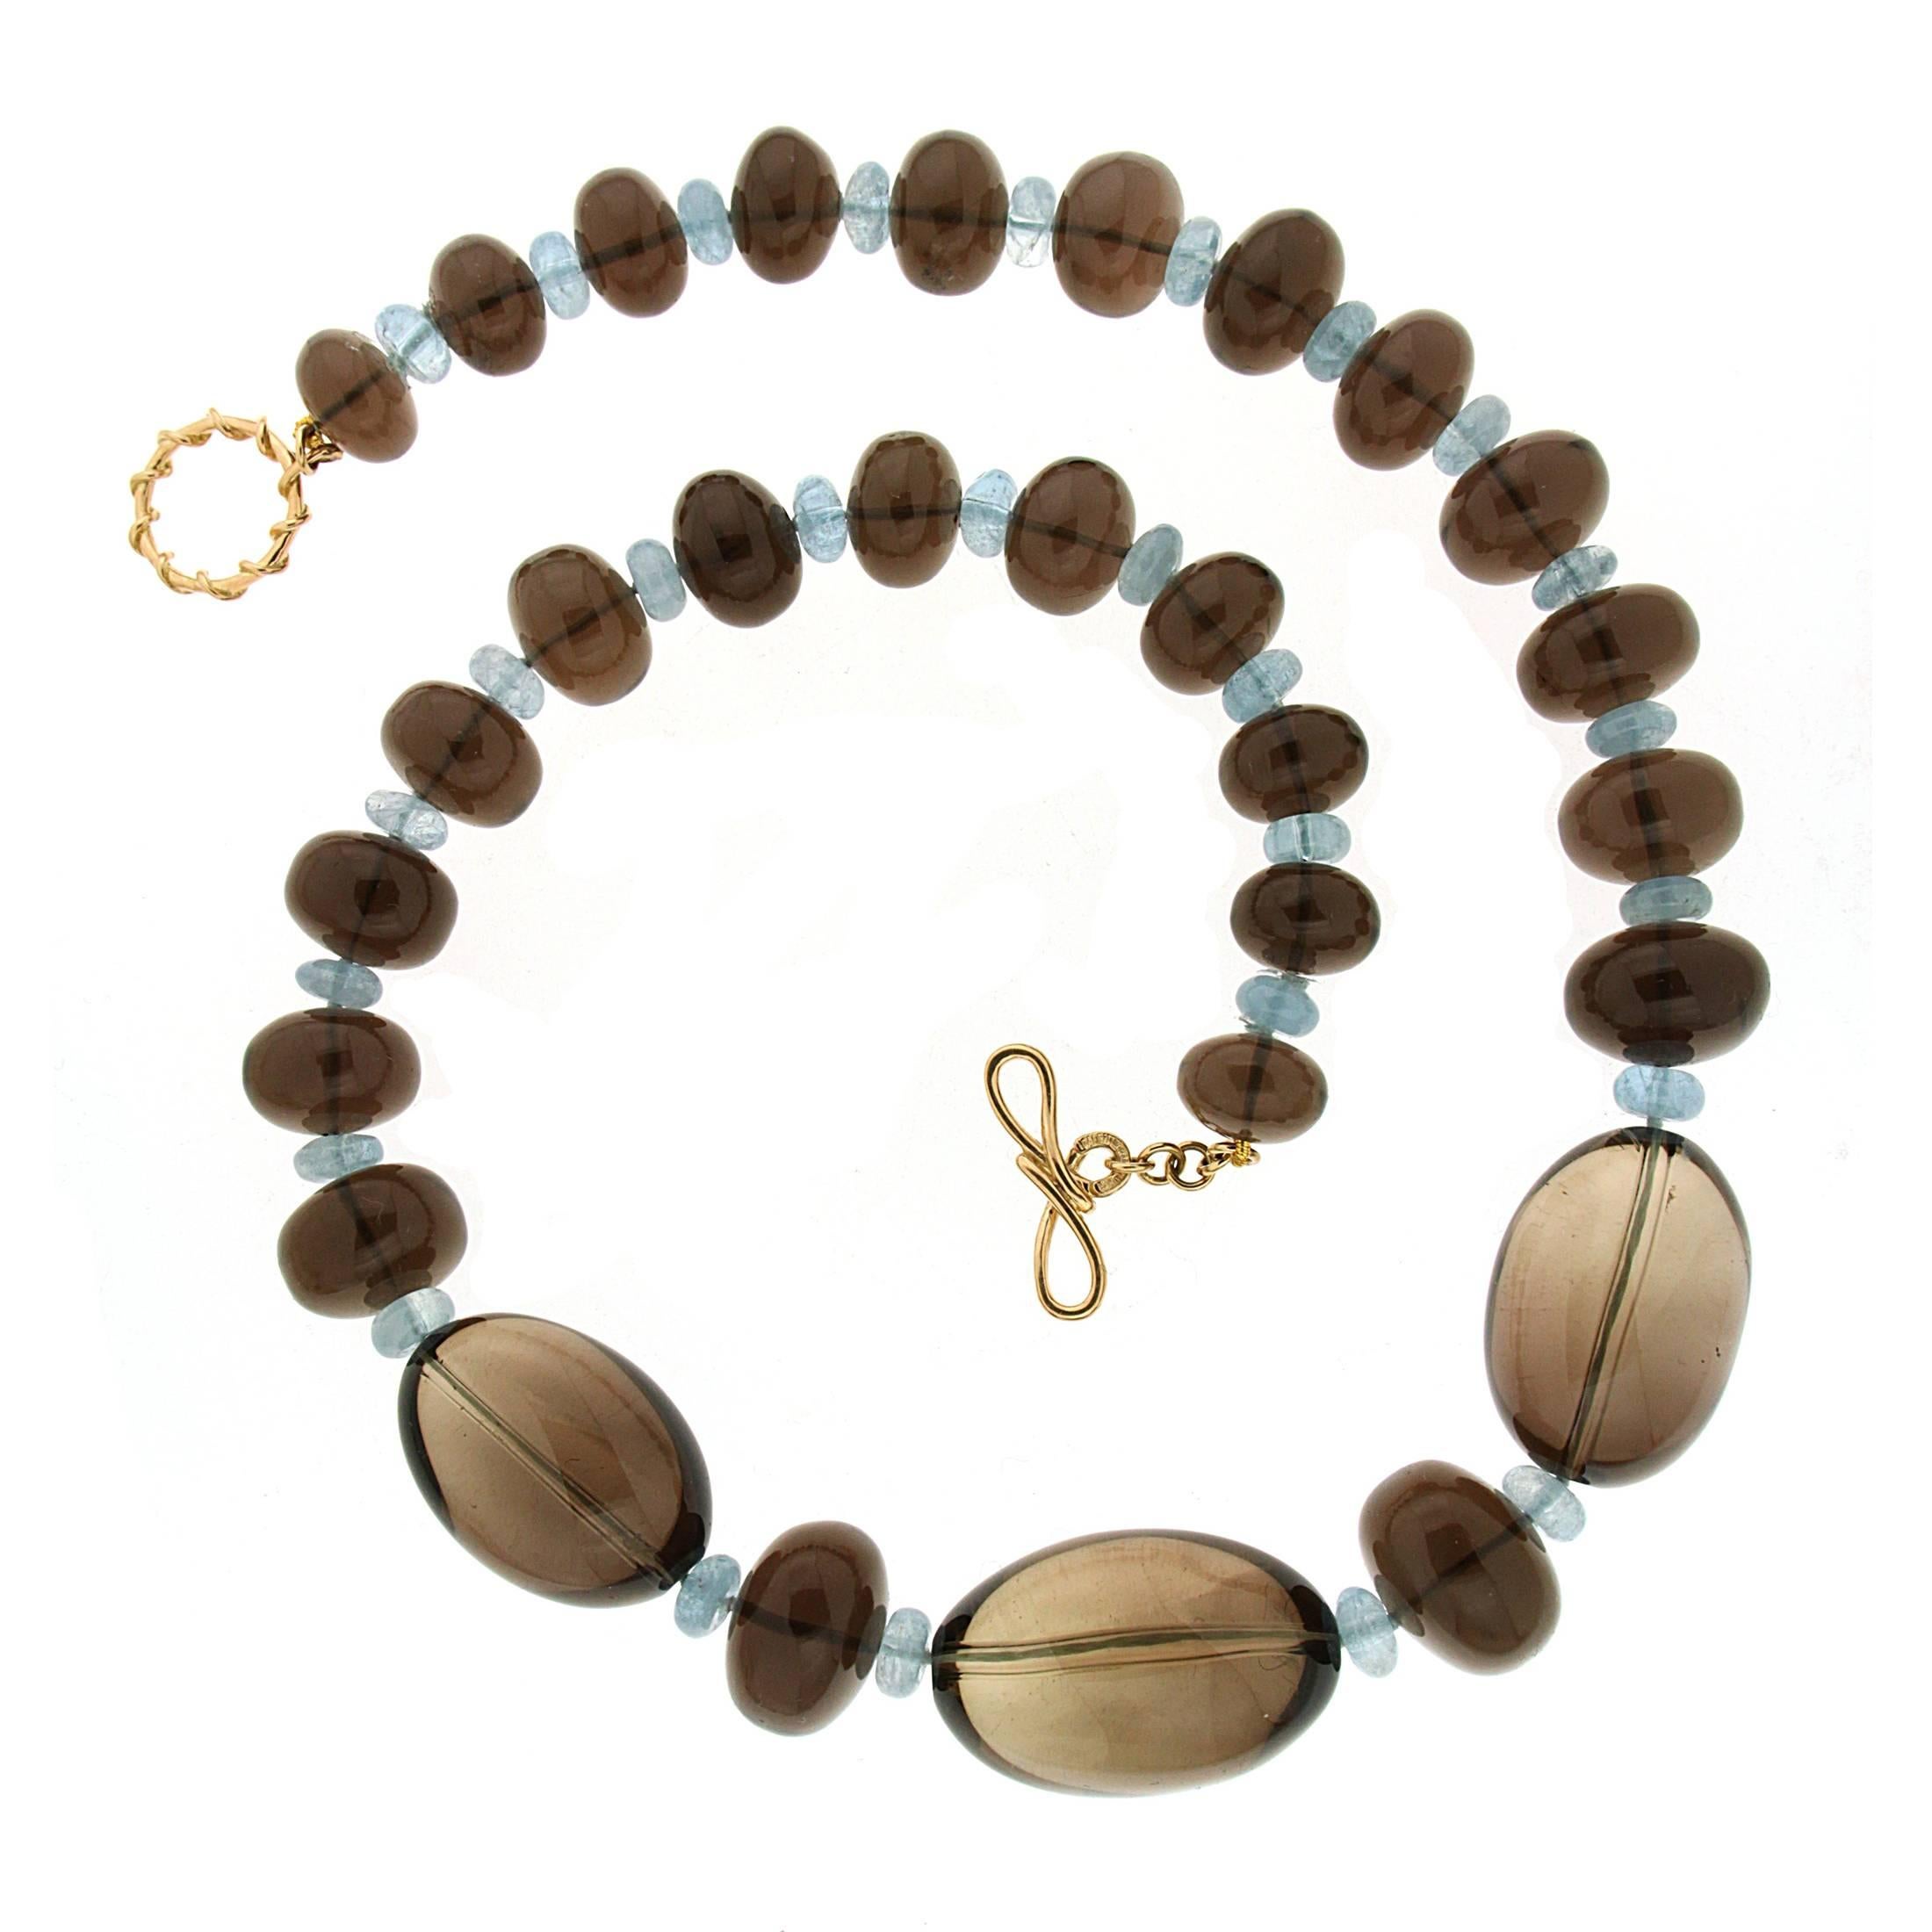 For decades, Valentin Magro's fine jewelry creations have illuminated the most special of occasions. This unique necklace features brown Topaz rondelles and large oval bead with aquamarine rondelles decorated in between. The necklace is finished